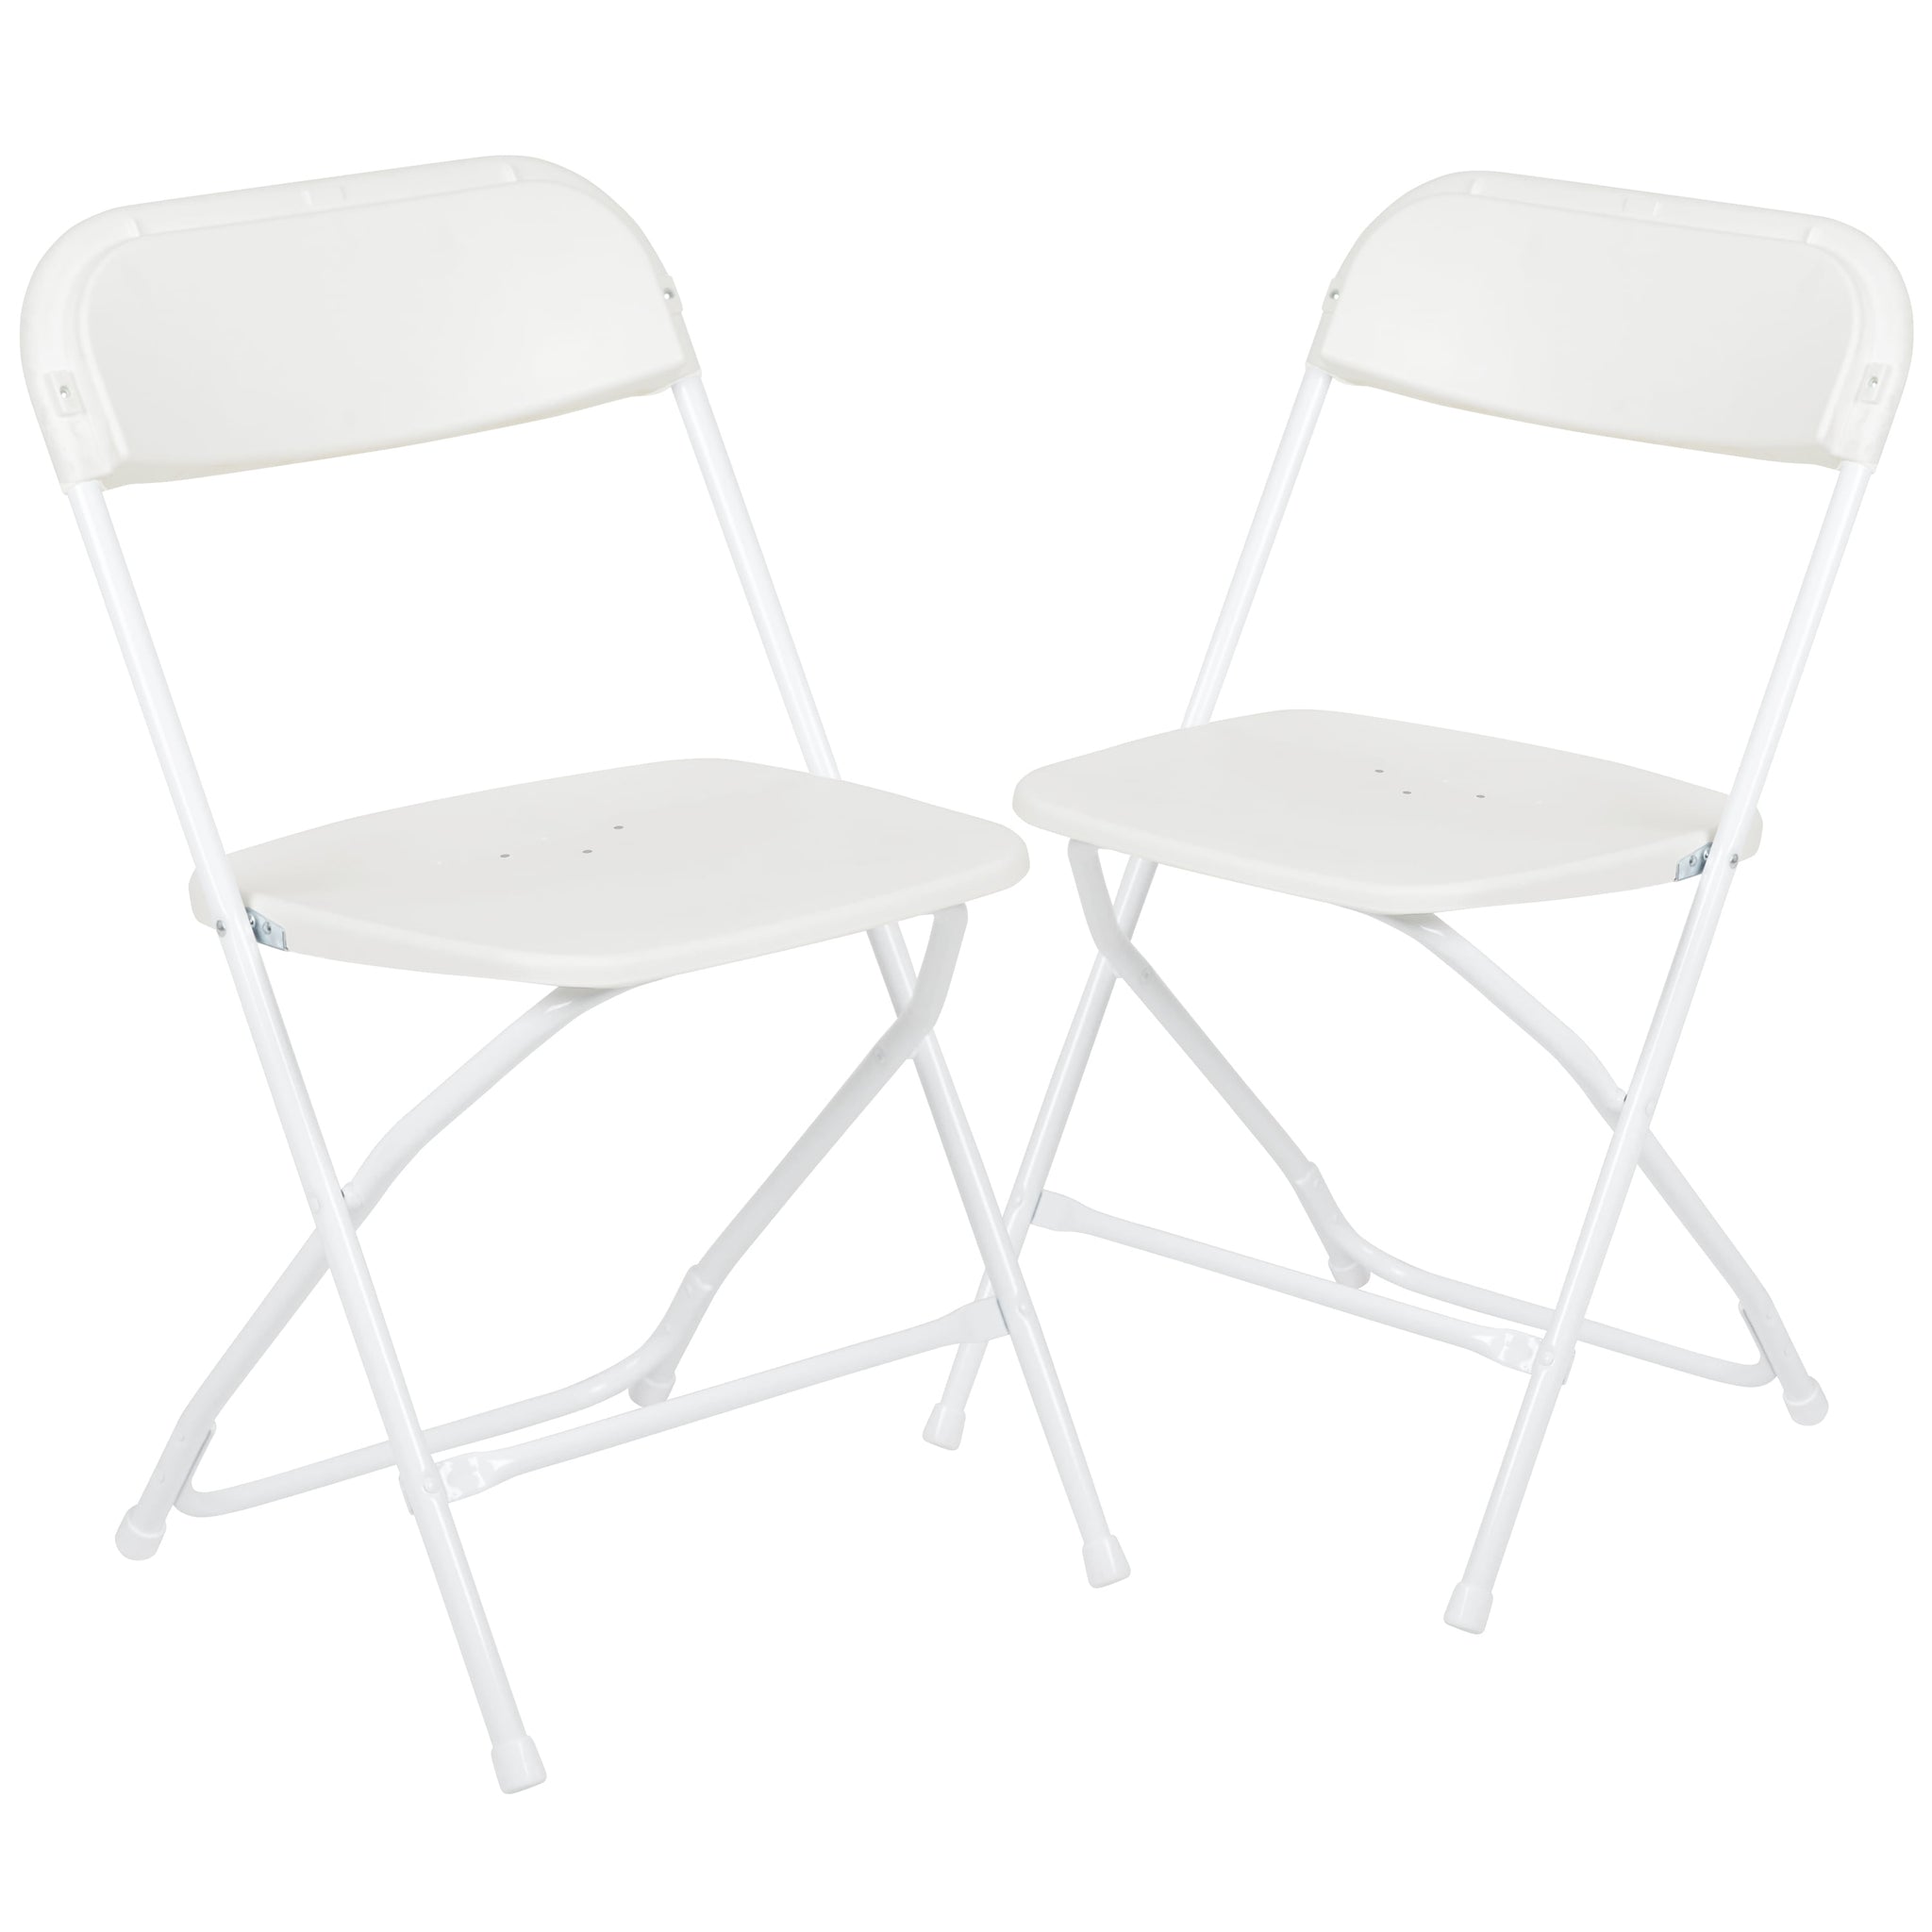 Series Plastic Folding Chair - Beige - 2 Pack 650LB Weight Capacity Comfortable Event Chair-Lightweight Folding Chair ZopiStyle